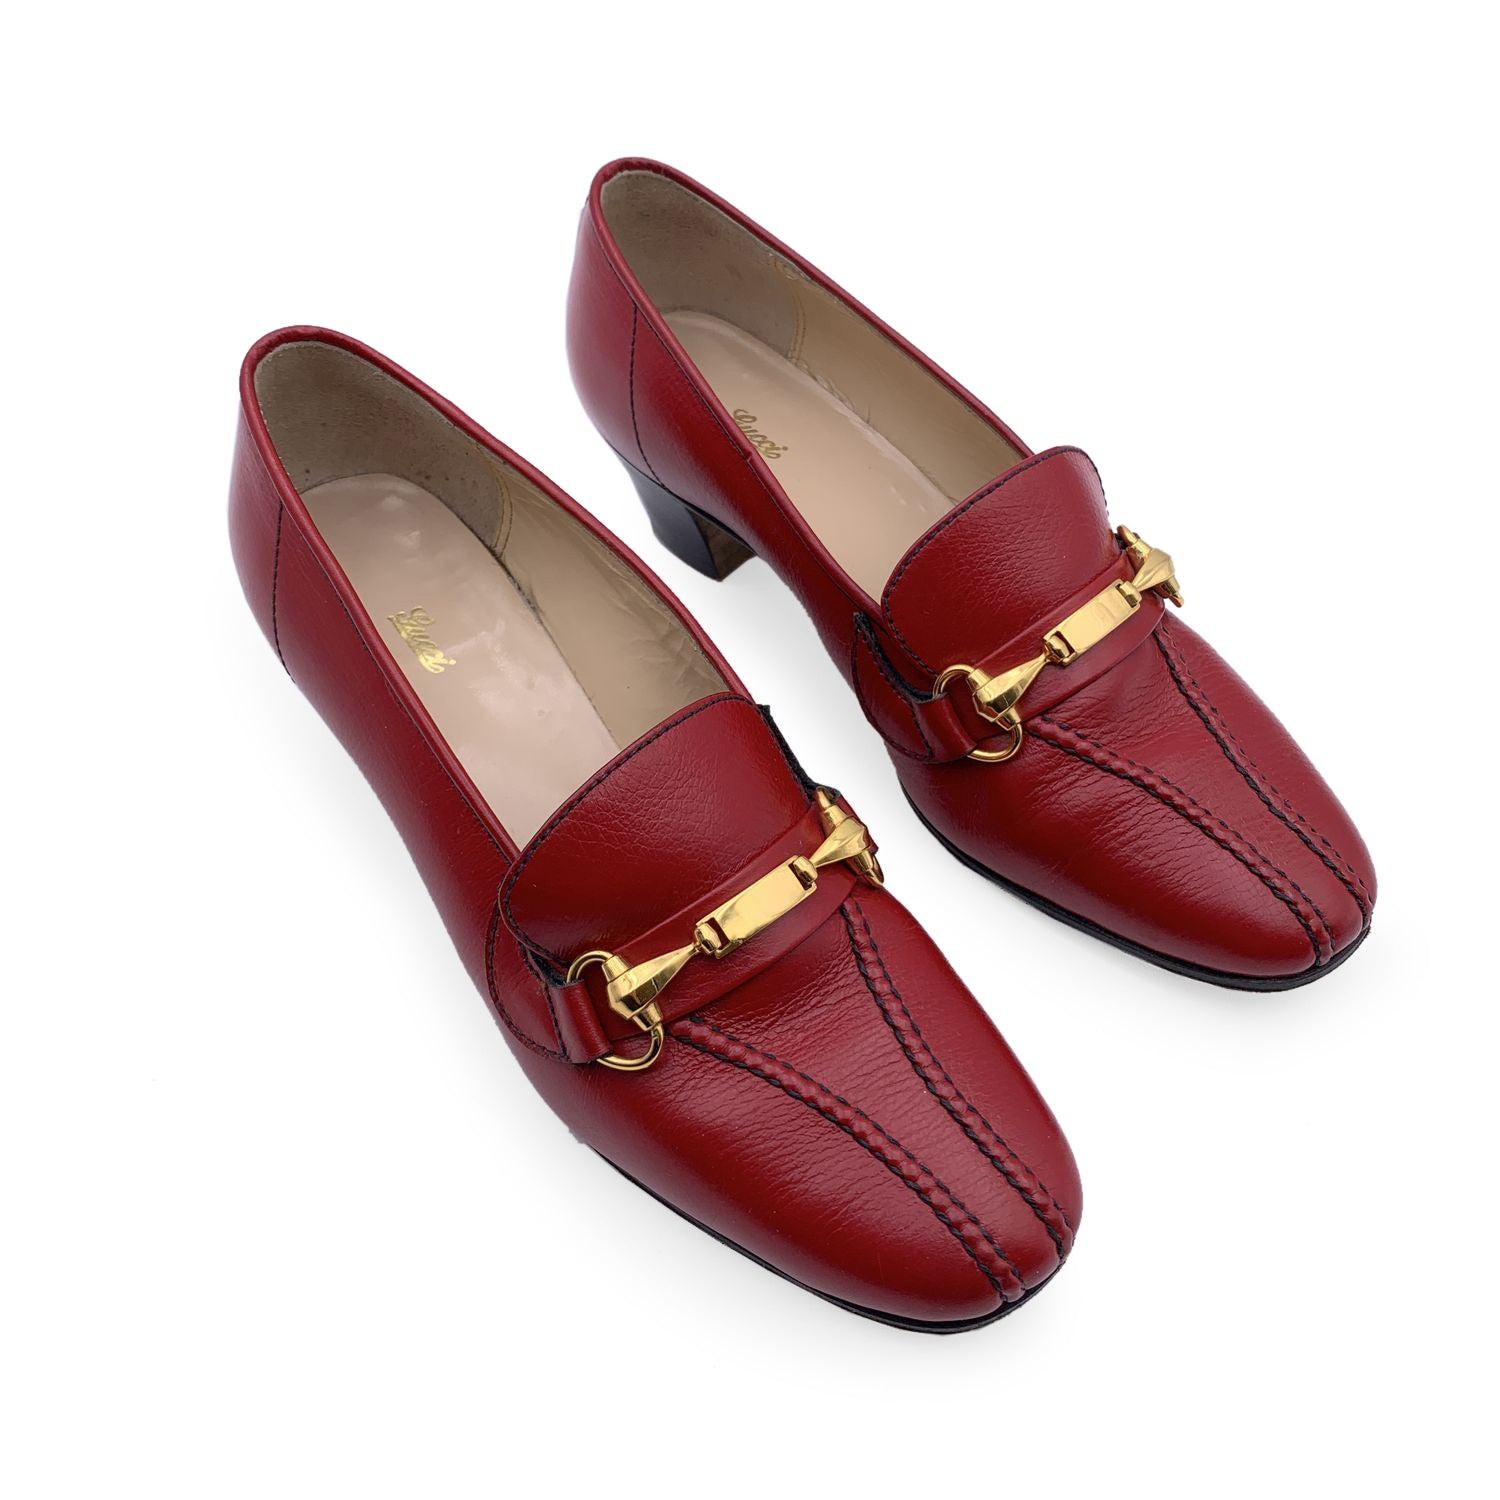 Beautiful vintage GUCCI red leather mid-height shoes. Crafted in red leather with gold-tone Horsebit detailing on the toes. They feature a round toe and slip-on design. Leather sole. Made in Italy. Size: EU 35.5 (The size shown for this item is the